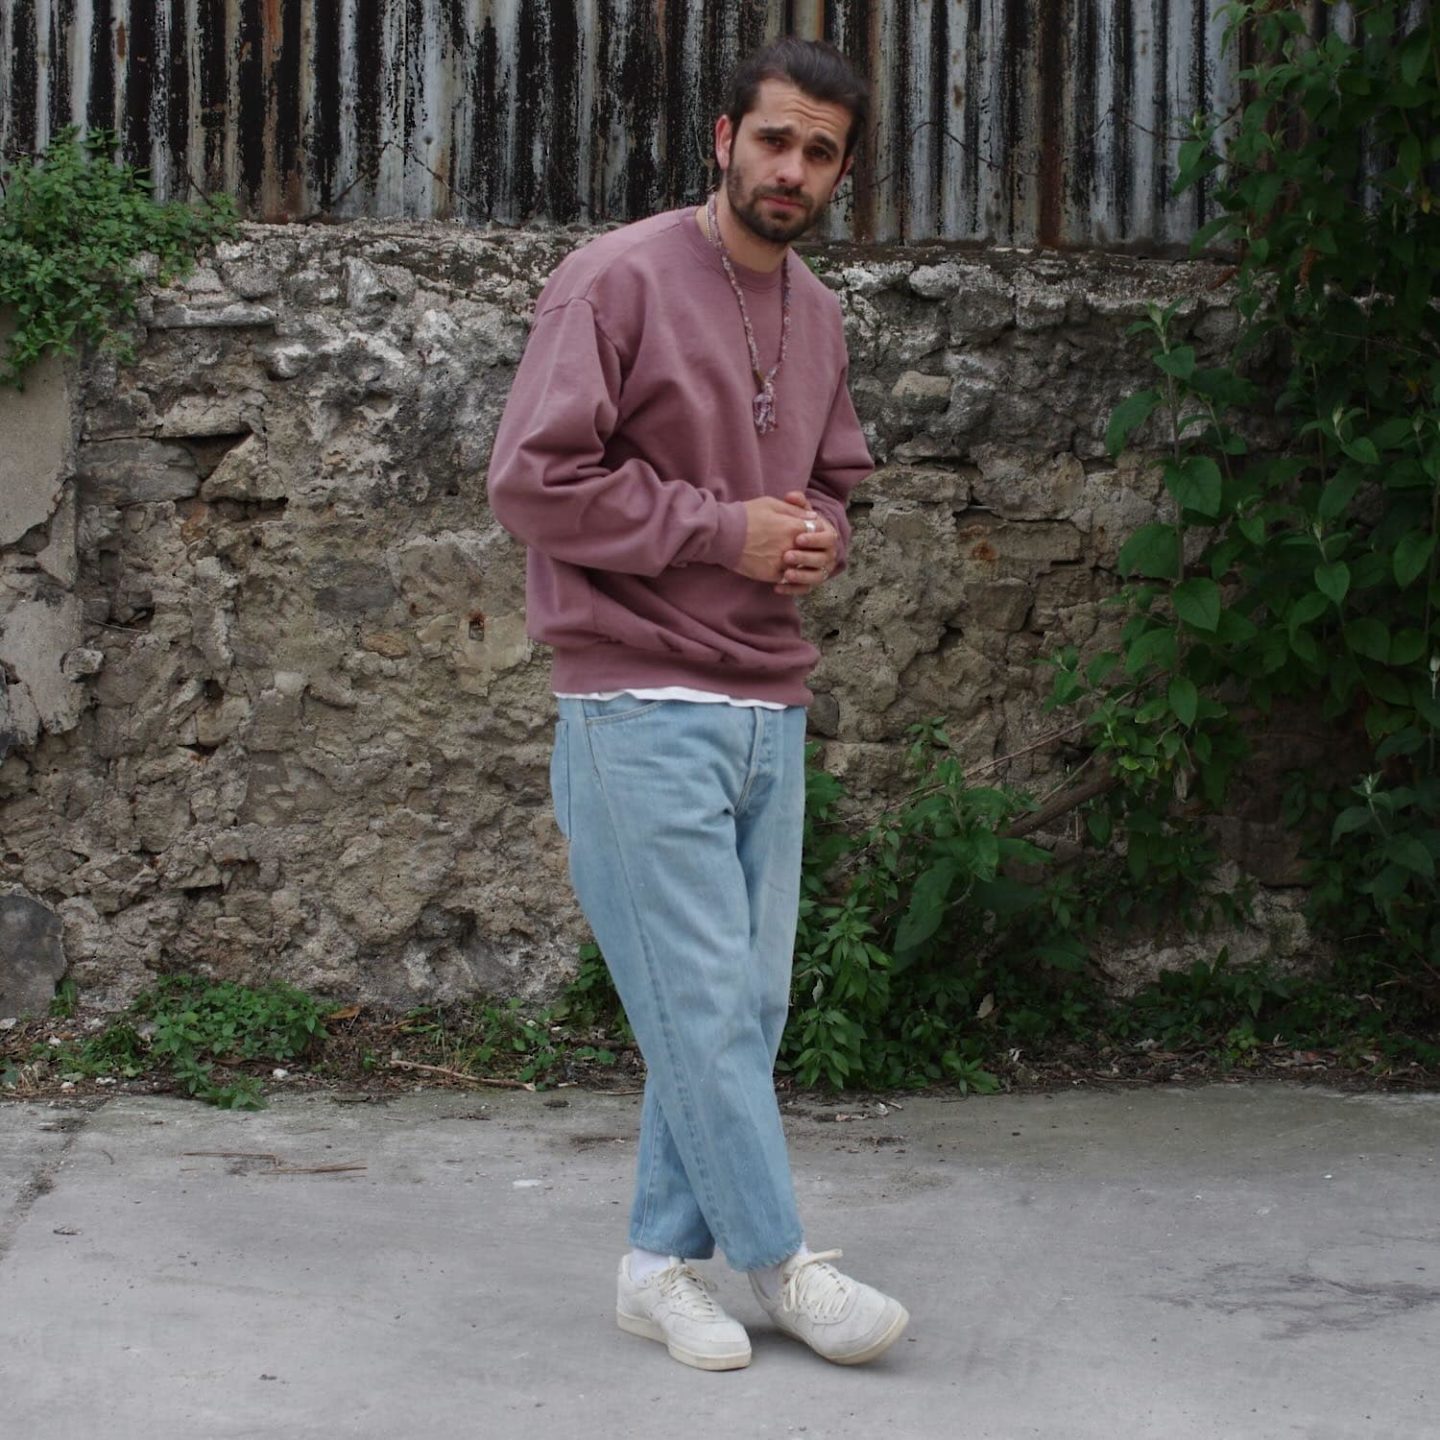 Look homme sweat violet jean bleach sneakers blanches